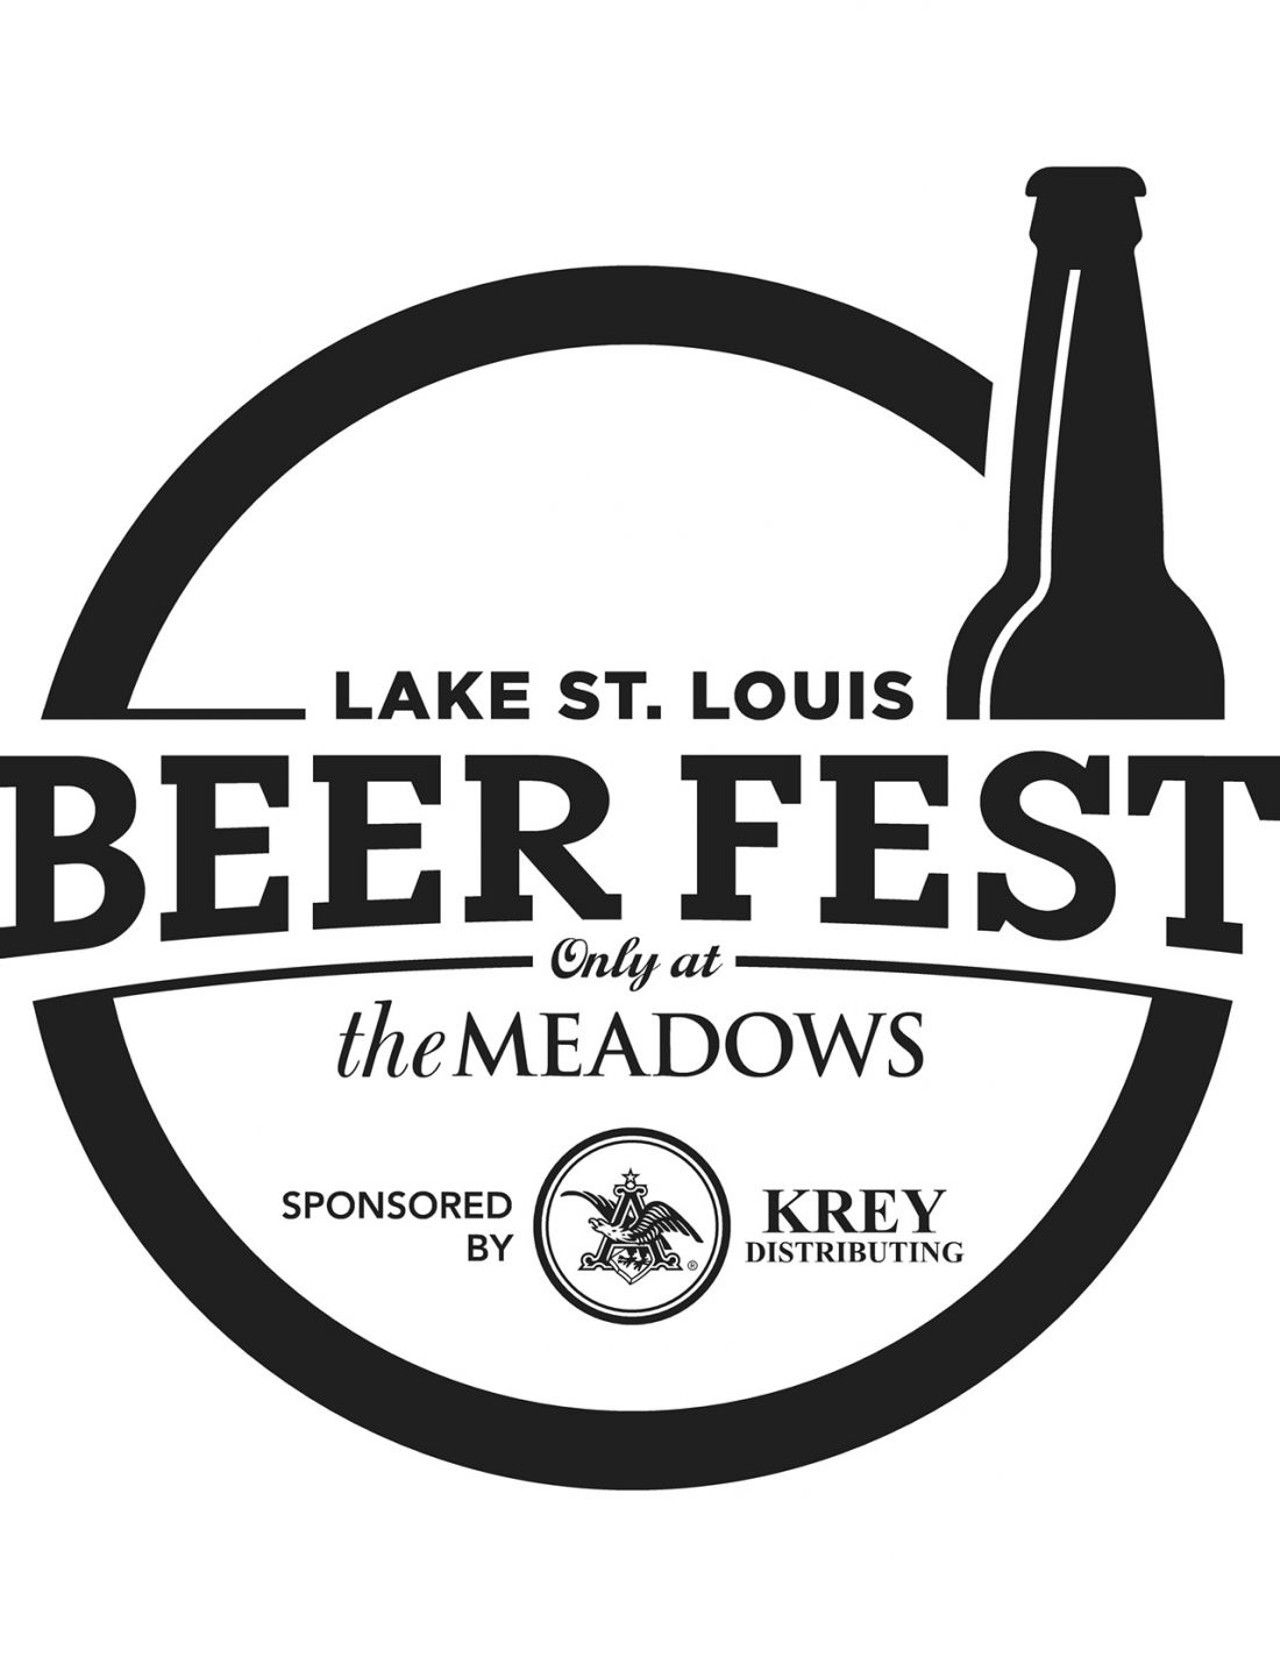 The Lake St. Louis BeerFest
September 22, 2018
Free beer samples? Yep, and eleven sampling tents. You can also buy bottled beer to go while you enjoy tunes from That 80s Band. What a fest!
Check it out here.
Photo courtesy of GraylingMO